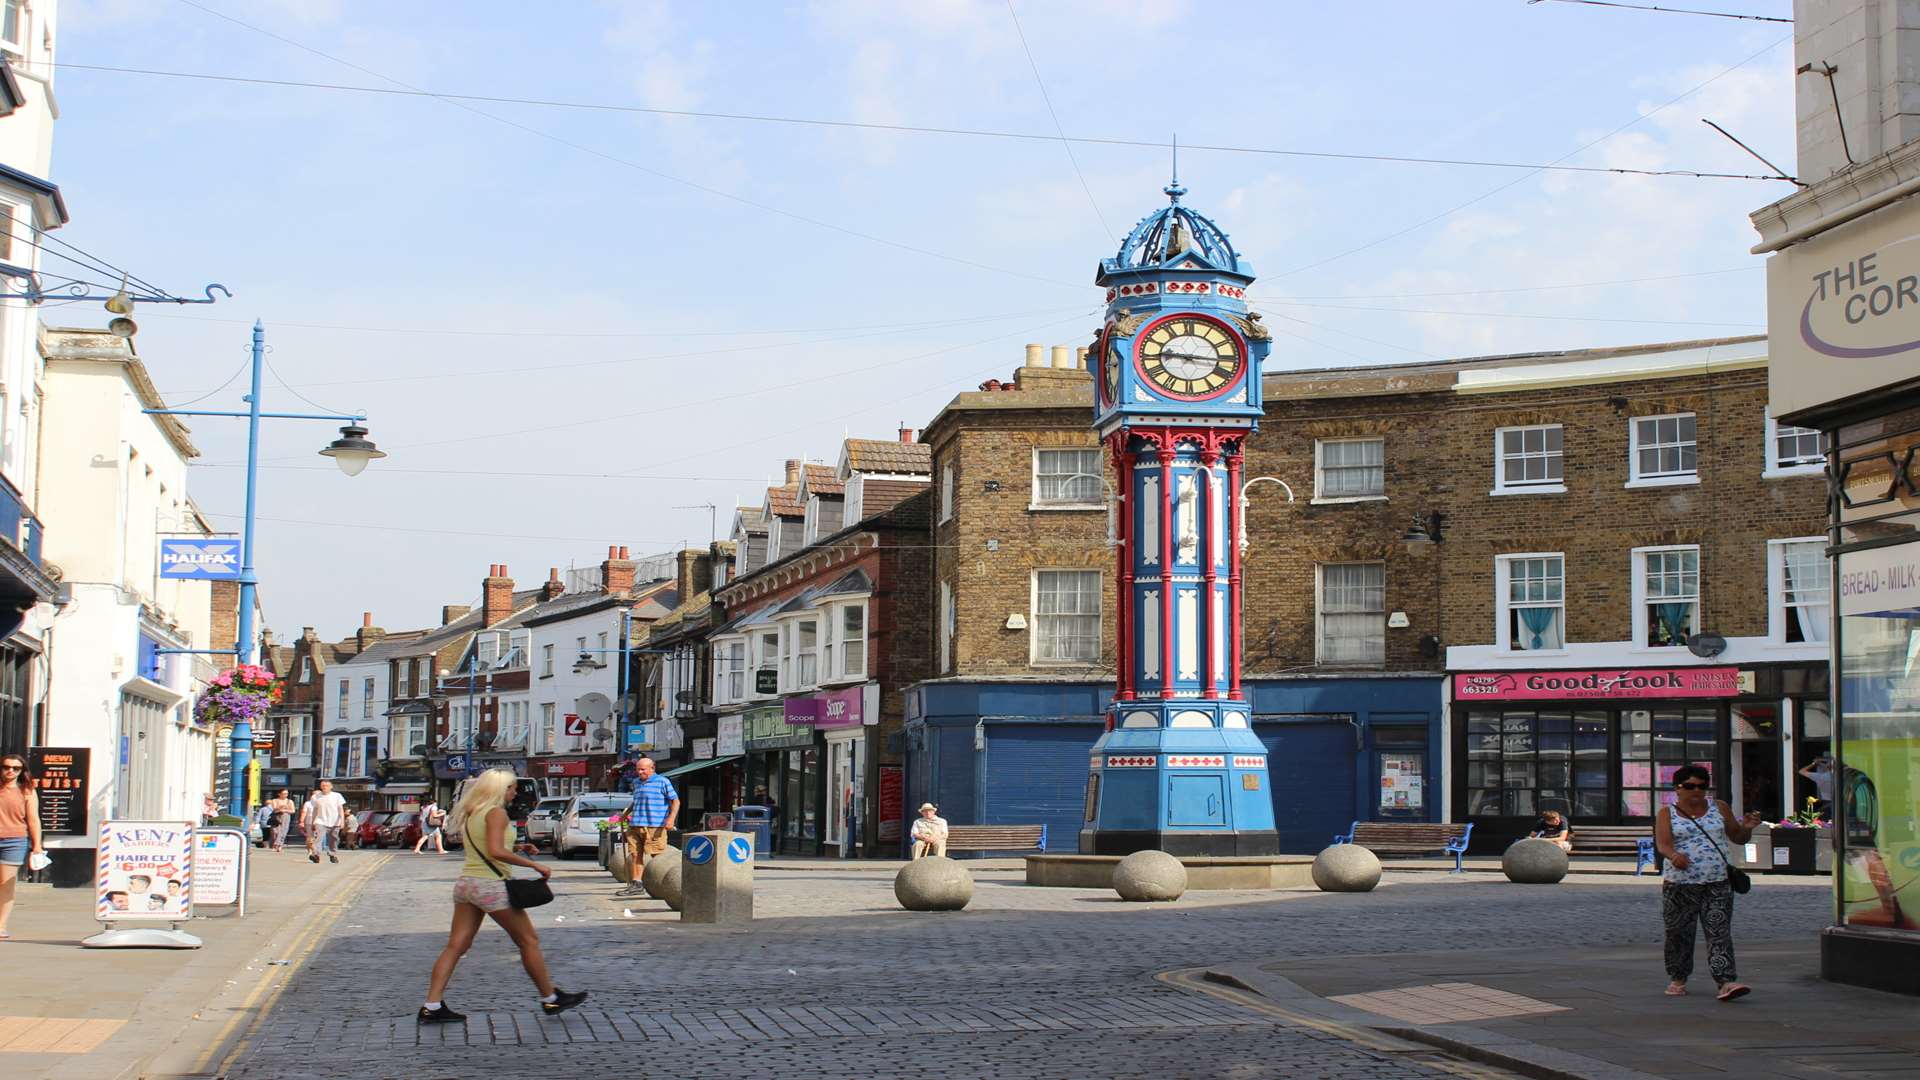 Now: Sheerness town centre as it is today